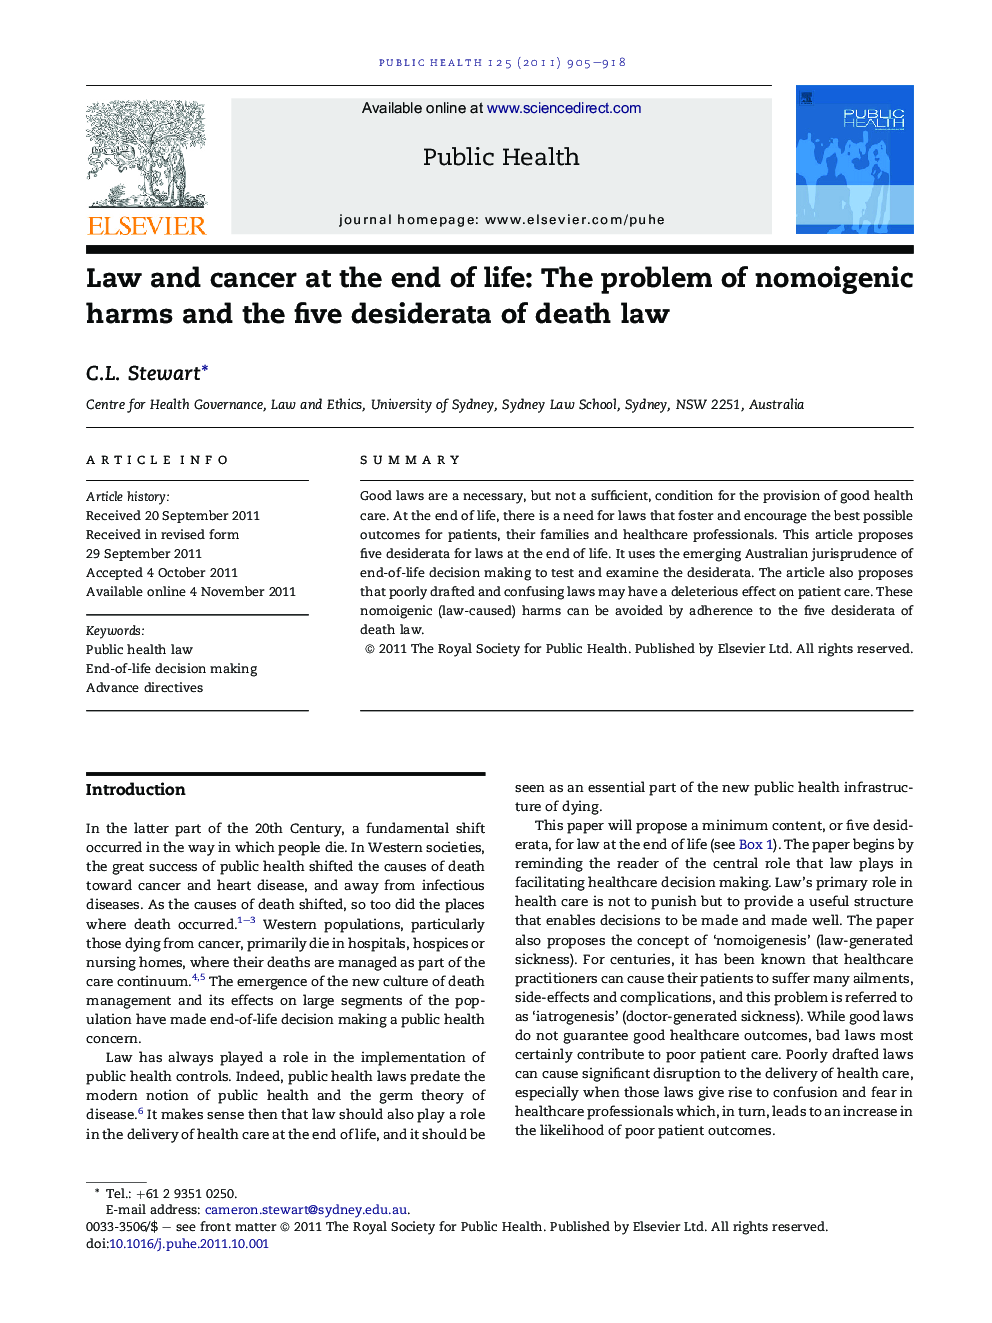 Law and cancer at the end of life: The problem of nomoigenic harms and the five desiderata of death law